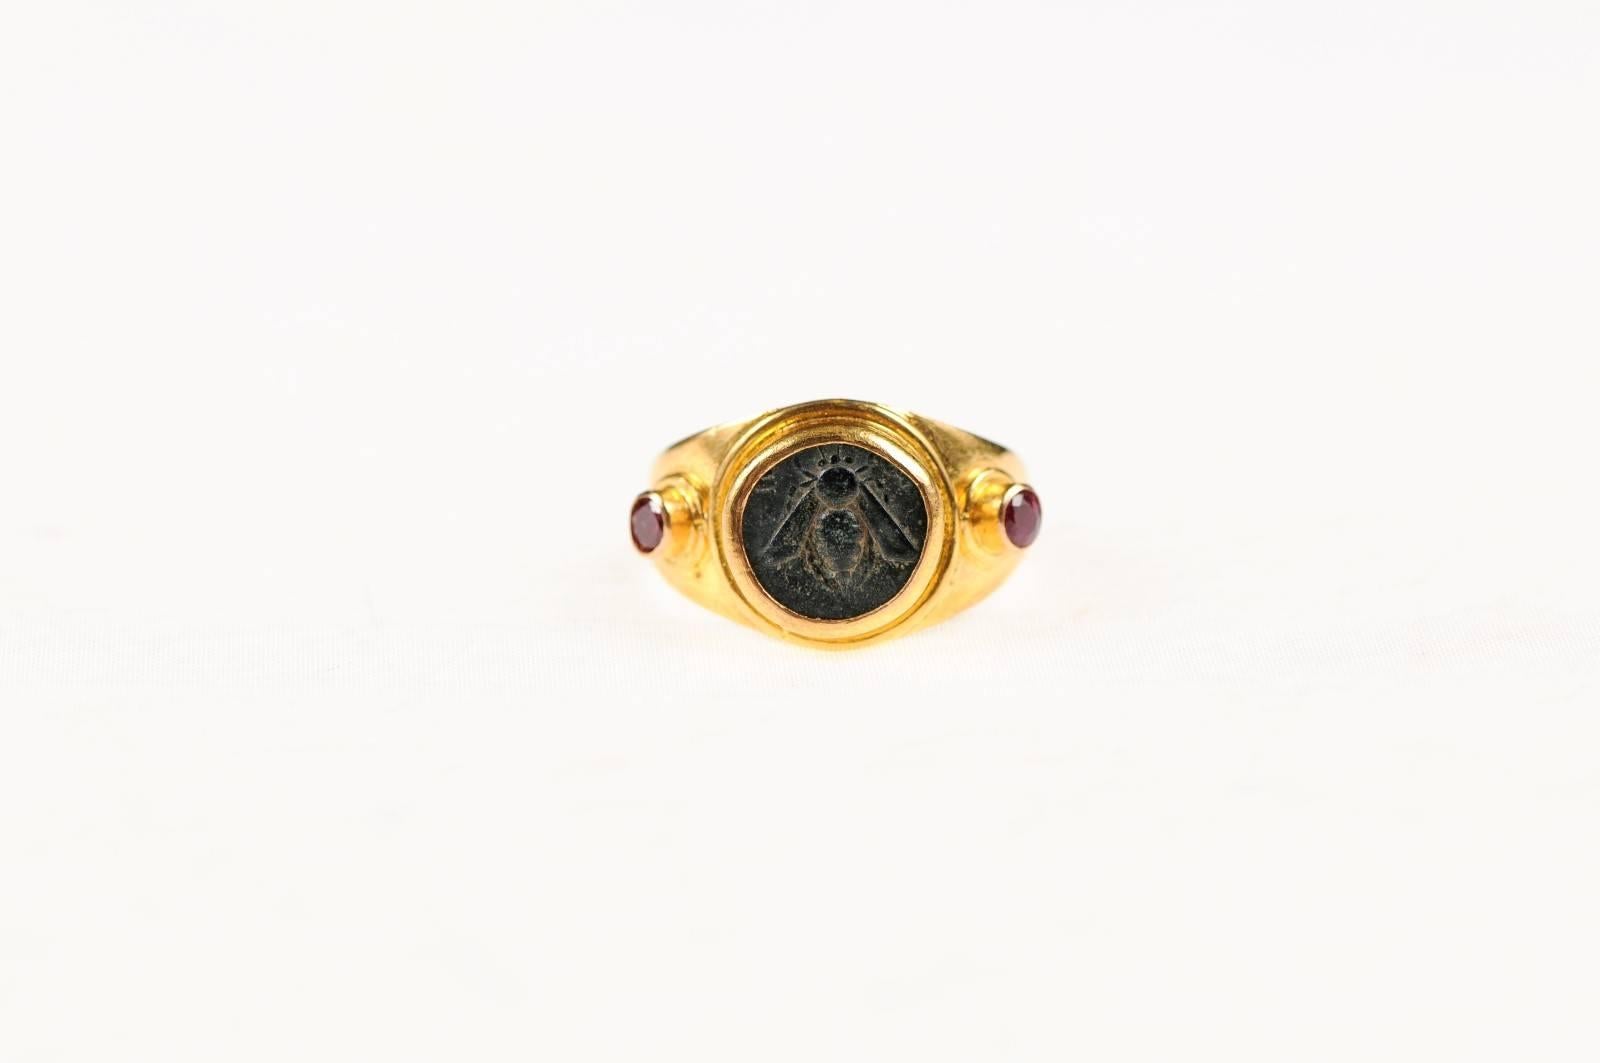 An authentic ancient Greek bronze coin from Ephesos, Ionia (circa 400-300 BC) custom mounted within a 22-karat gold band and flanked with rubies. Ancient Greek coins from Ephesos (often spelled Ephesus), Ionia are from the region which would now be